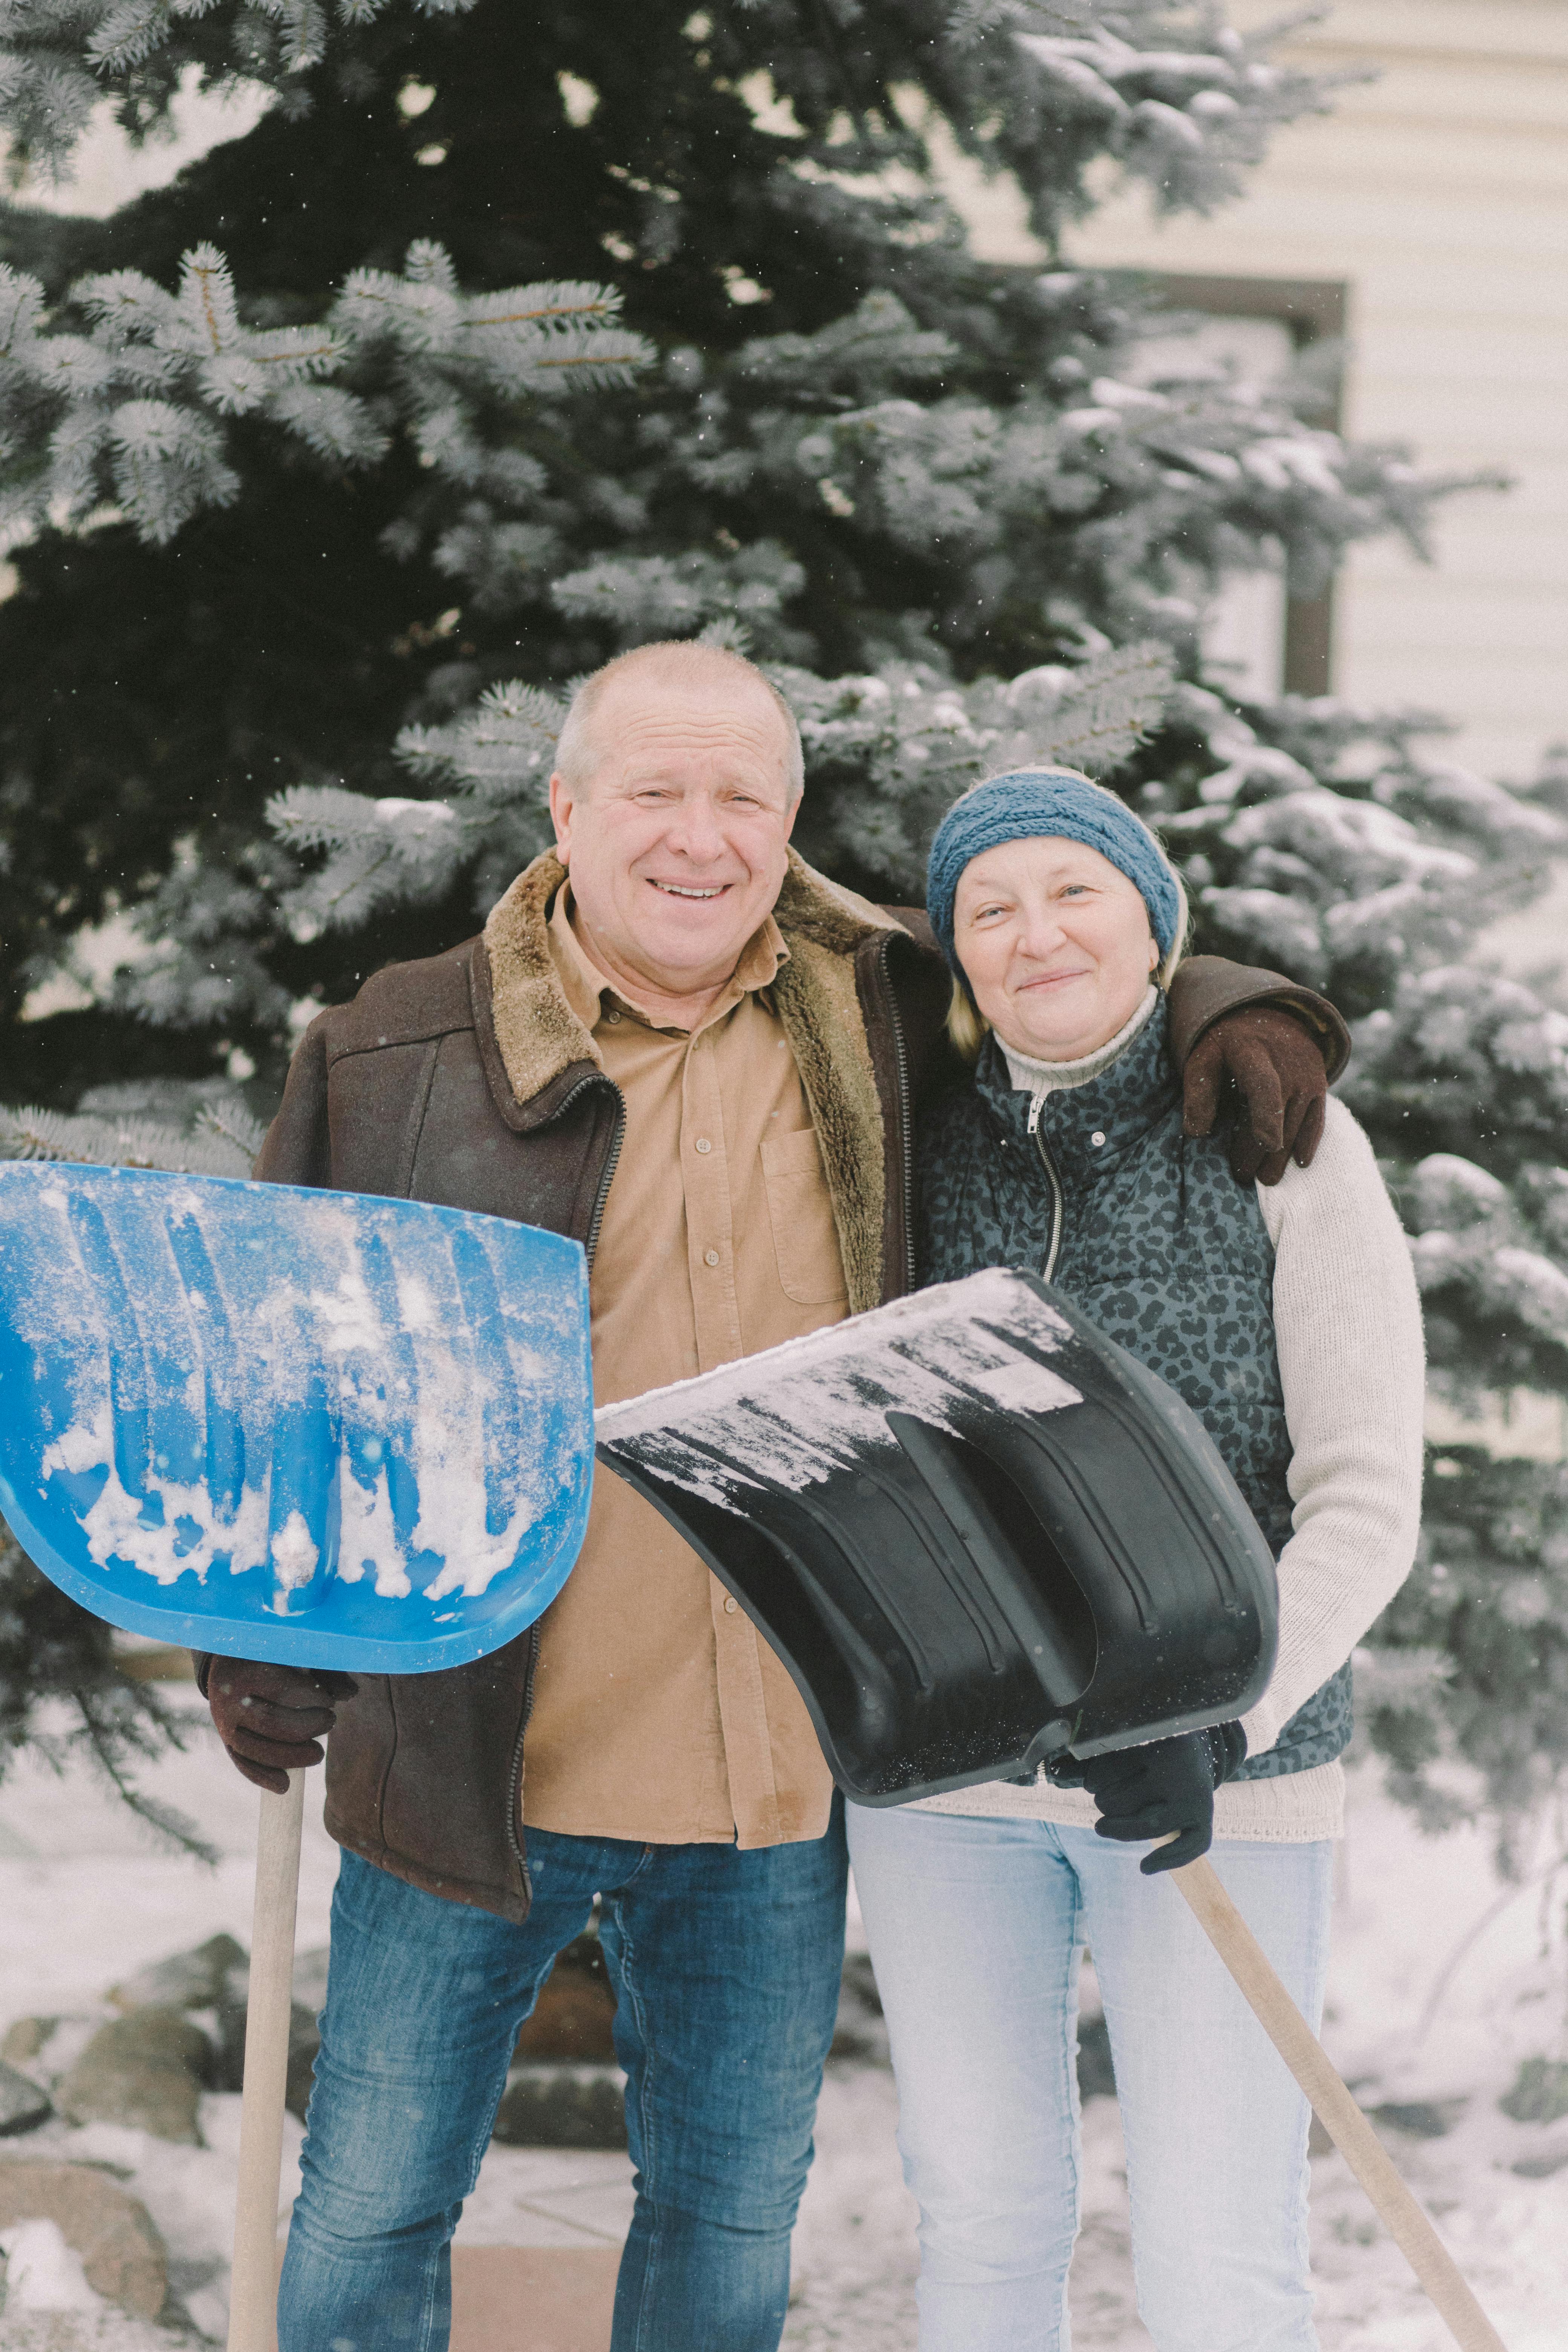 A happy middle-aged couple embracing while holding snow shovels | Source: Pexels